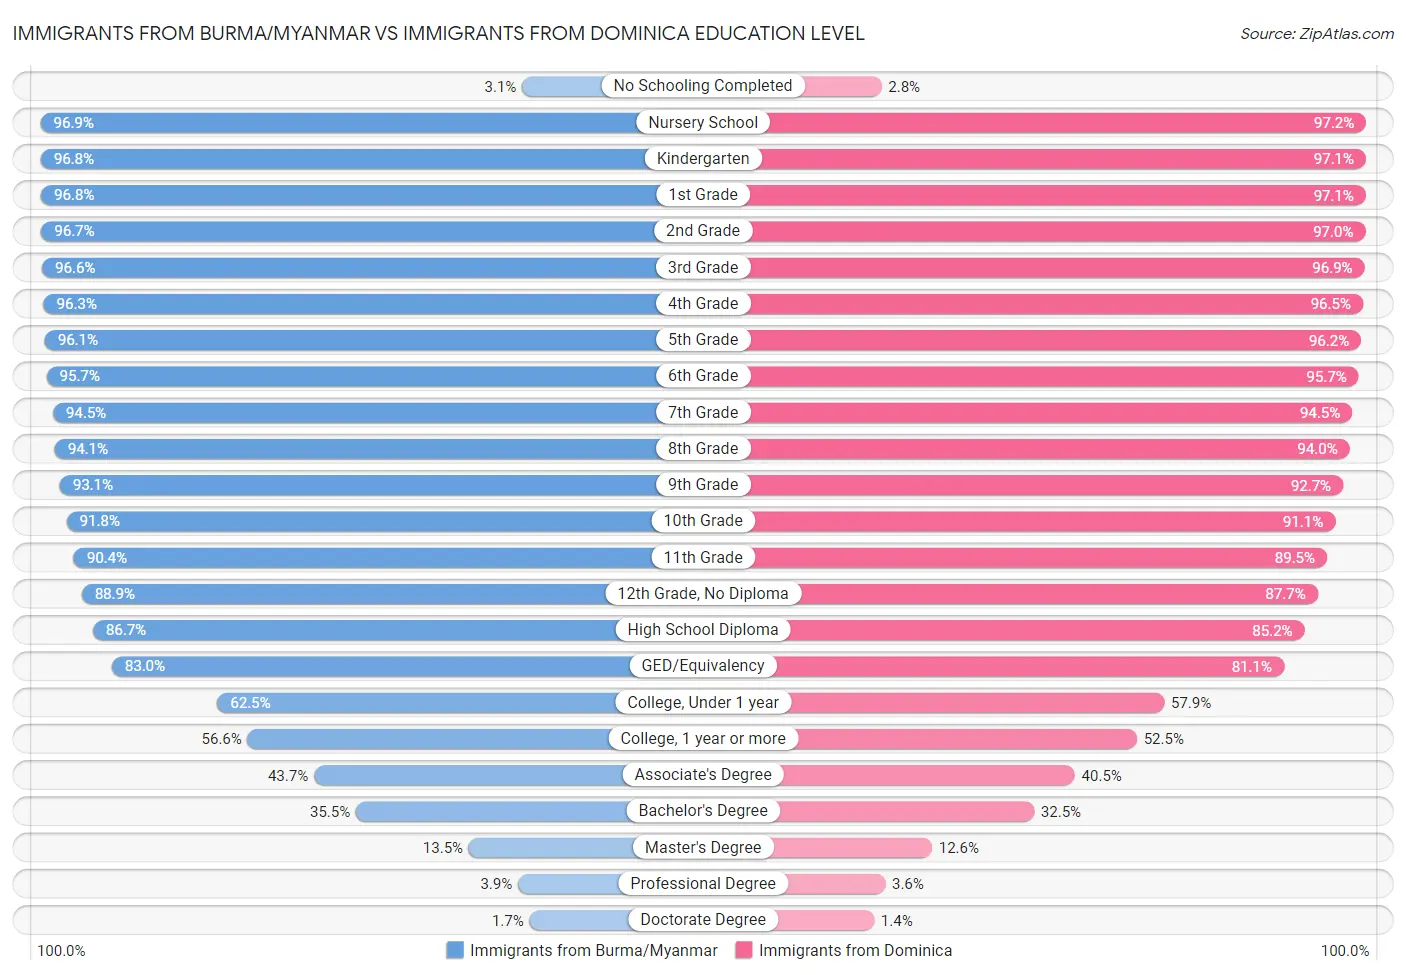 Immigrants from Burma/Myanmar vs Immigrants from Dominica Education Level